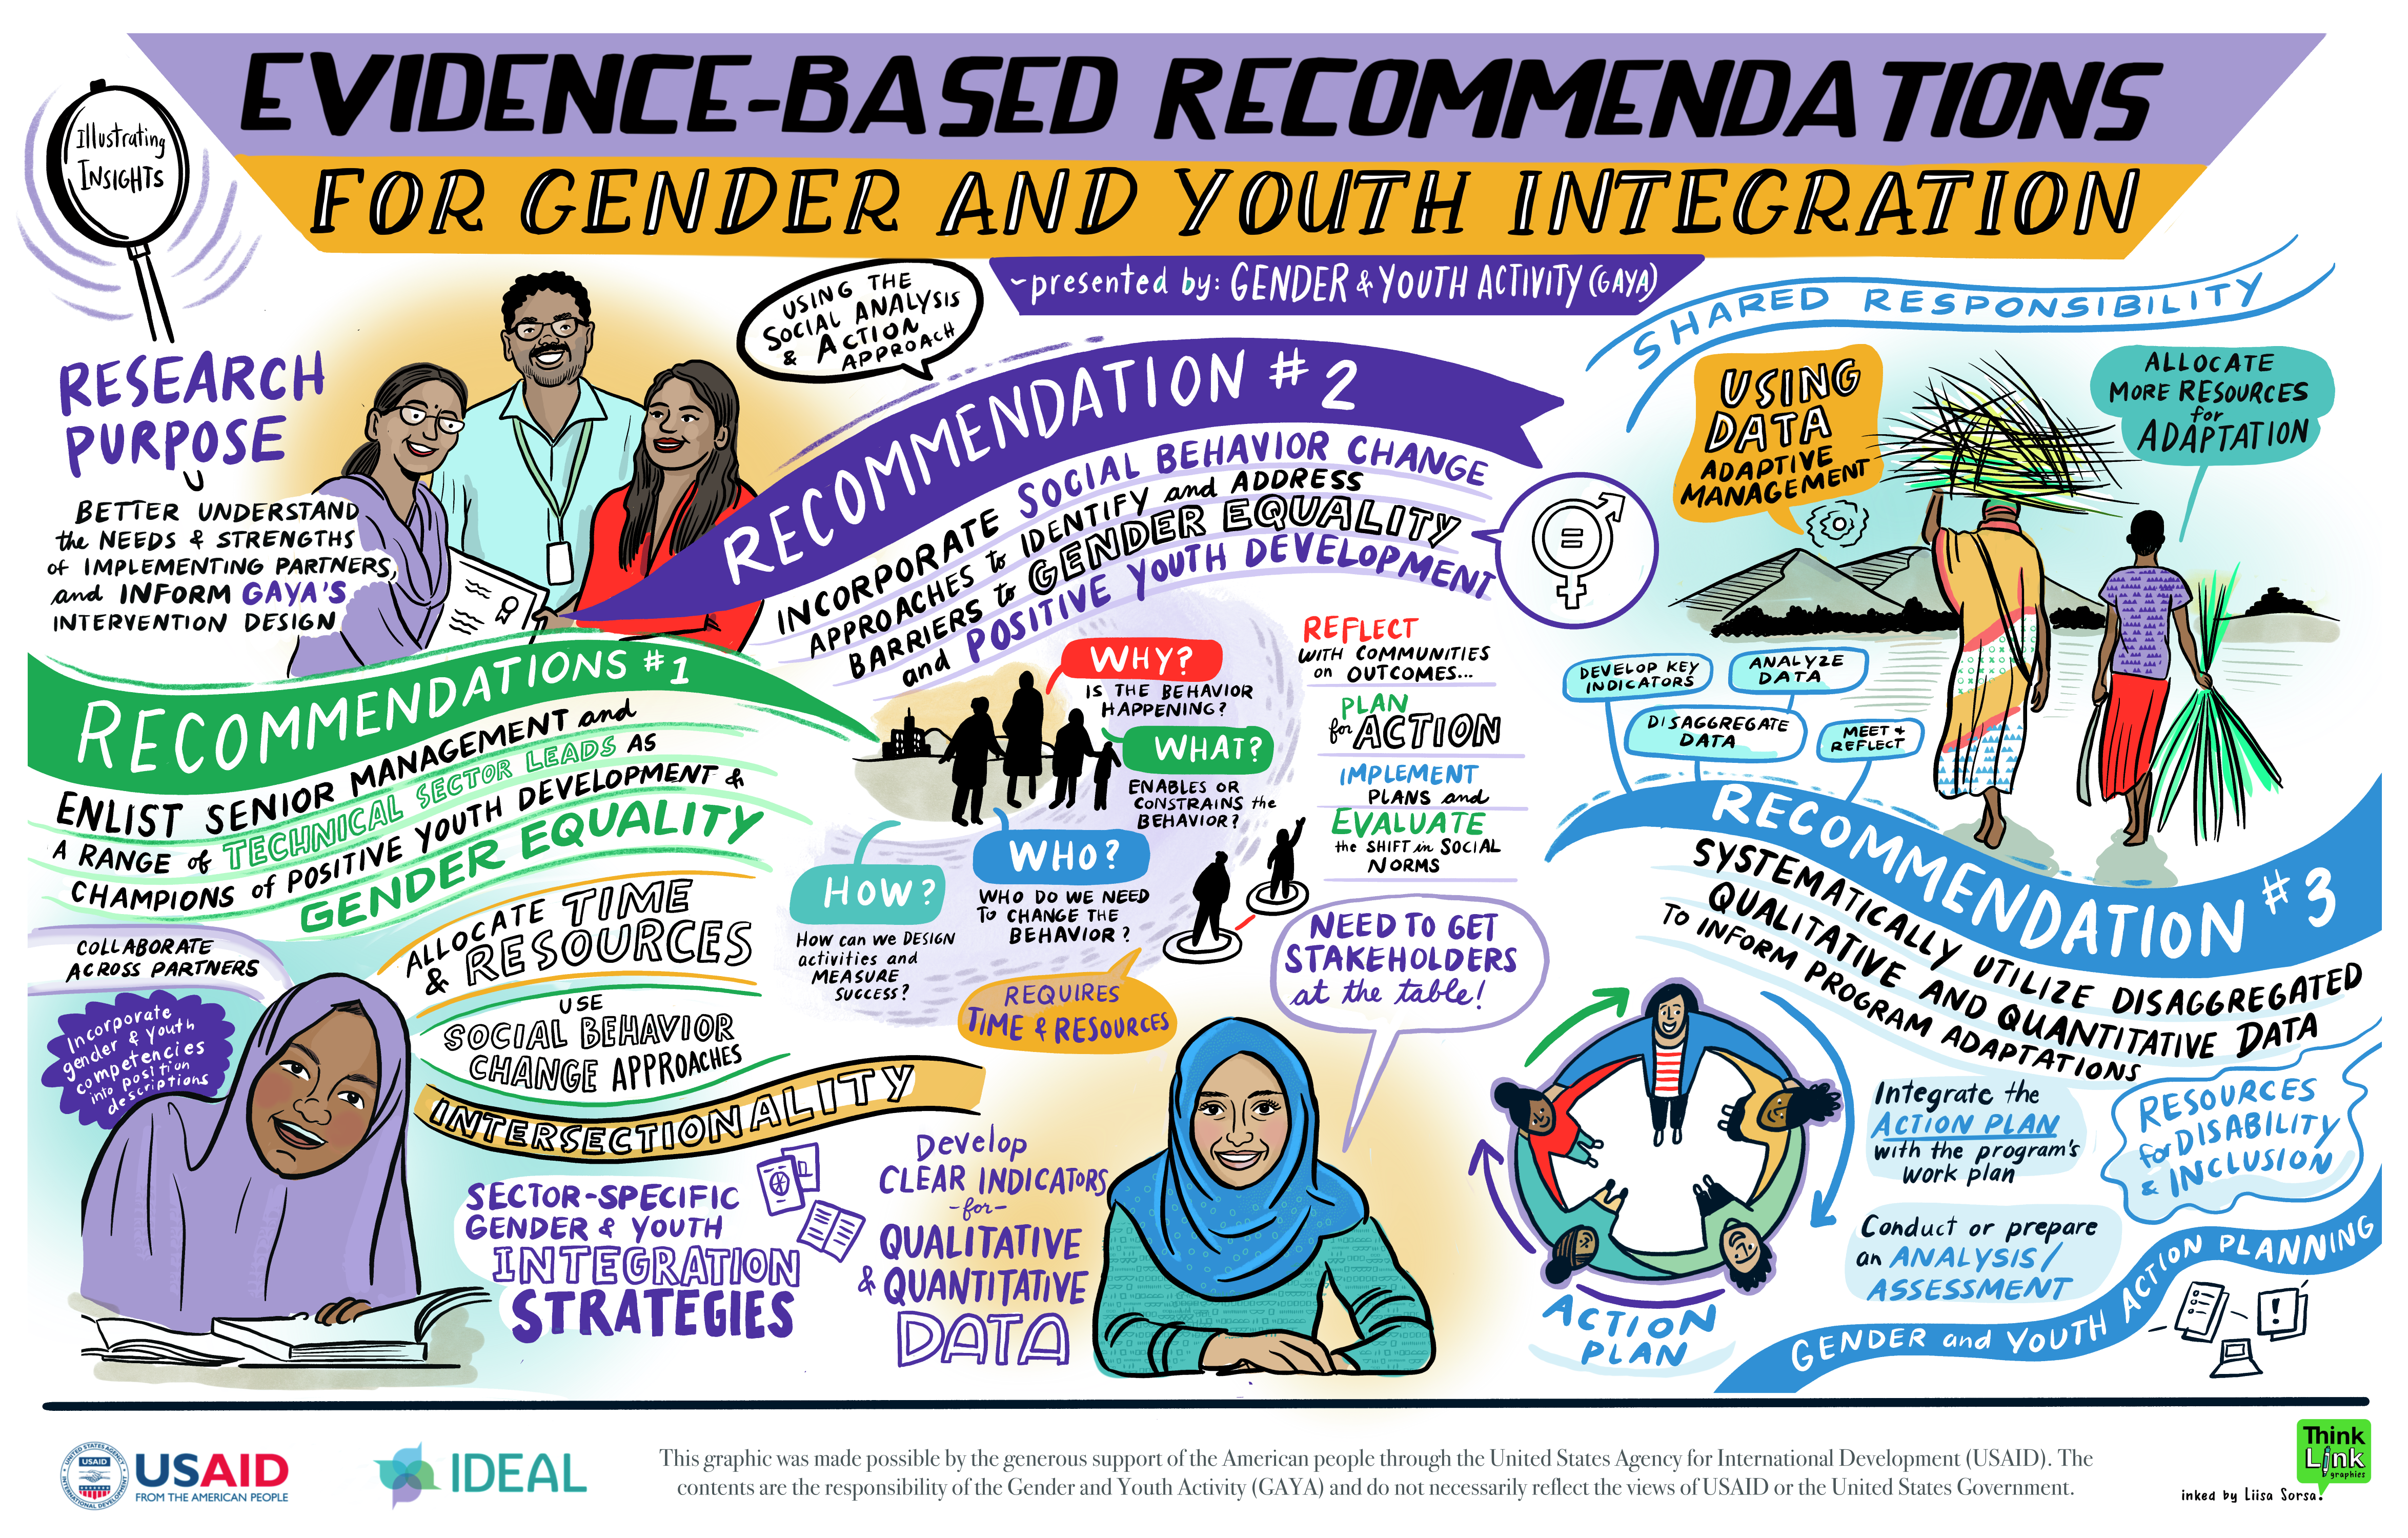 A colorful graphic mixing text with illustrated images of various people, places, and things to explain GAYA’s recommendations for gender and youth integration. This information is research-backed, the purpose being to better understand the needs and strengths of implementing partners and inform GAYA’s intervention design.